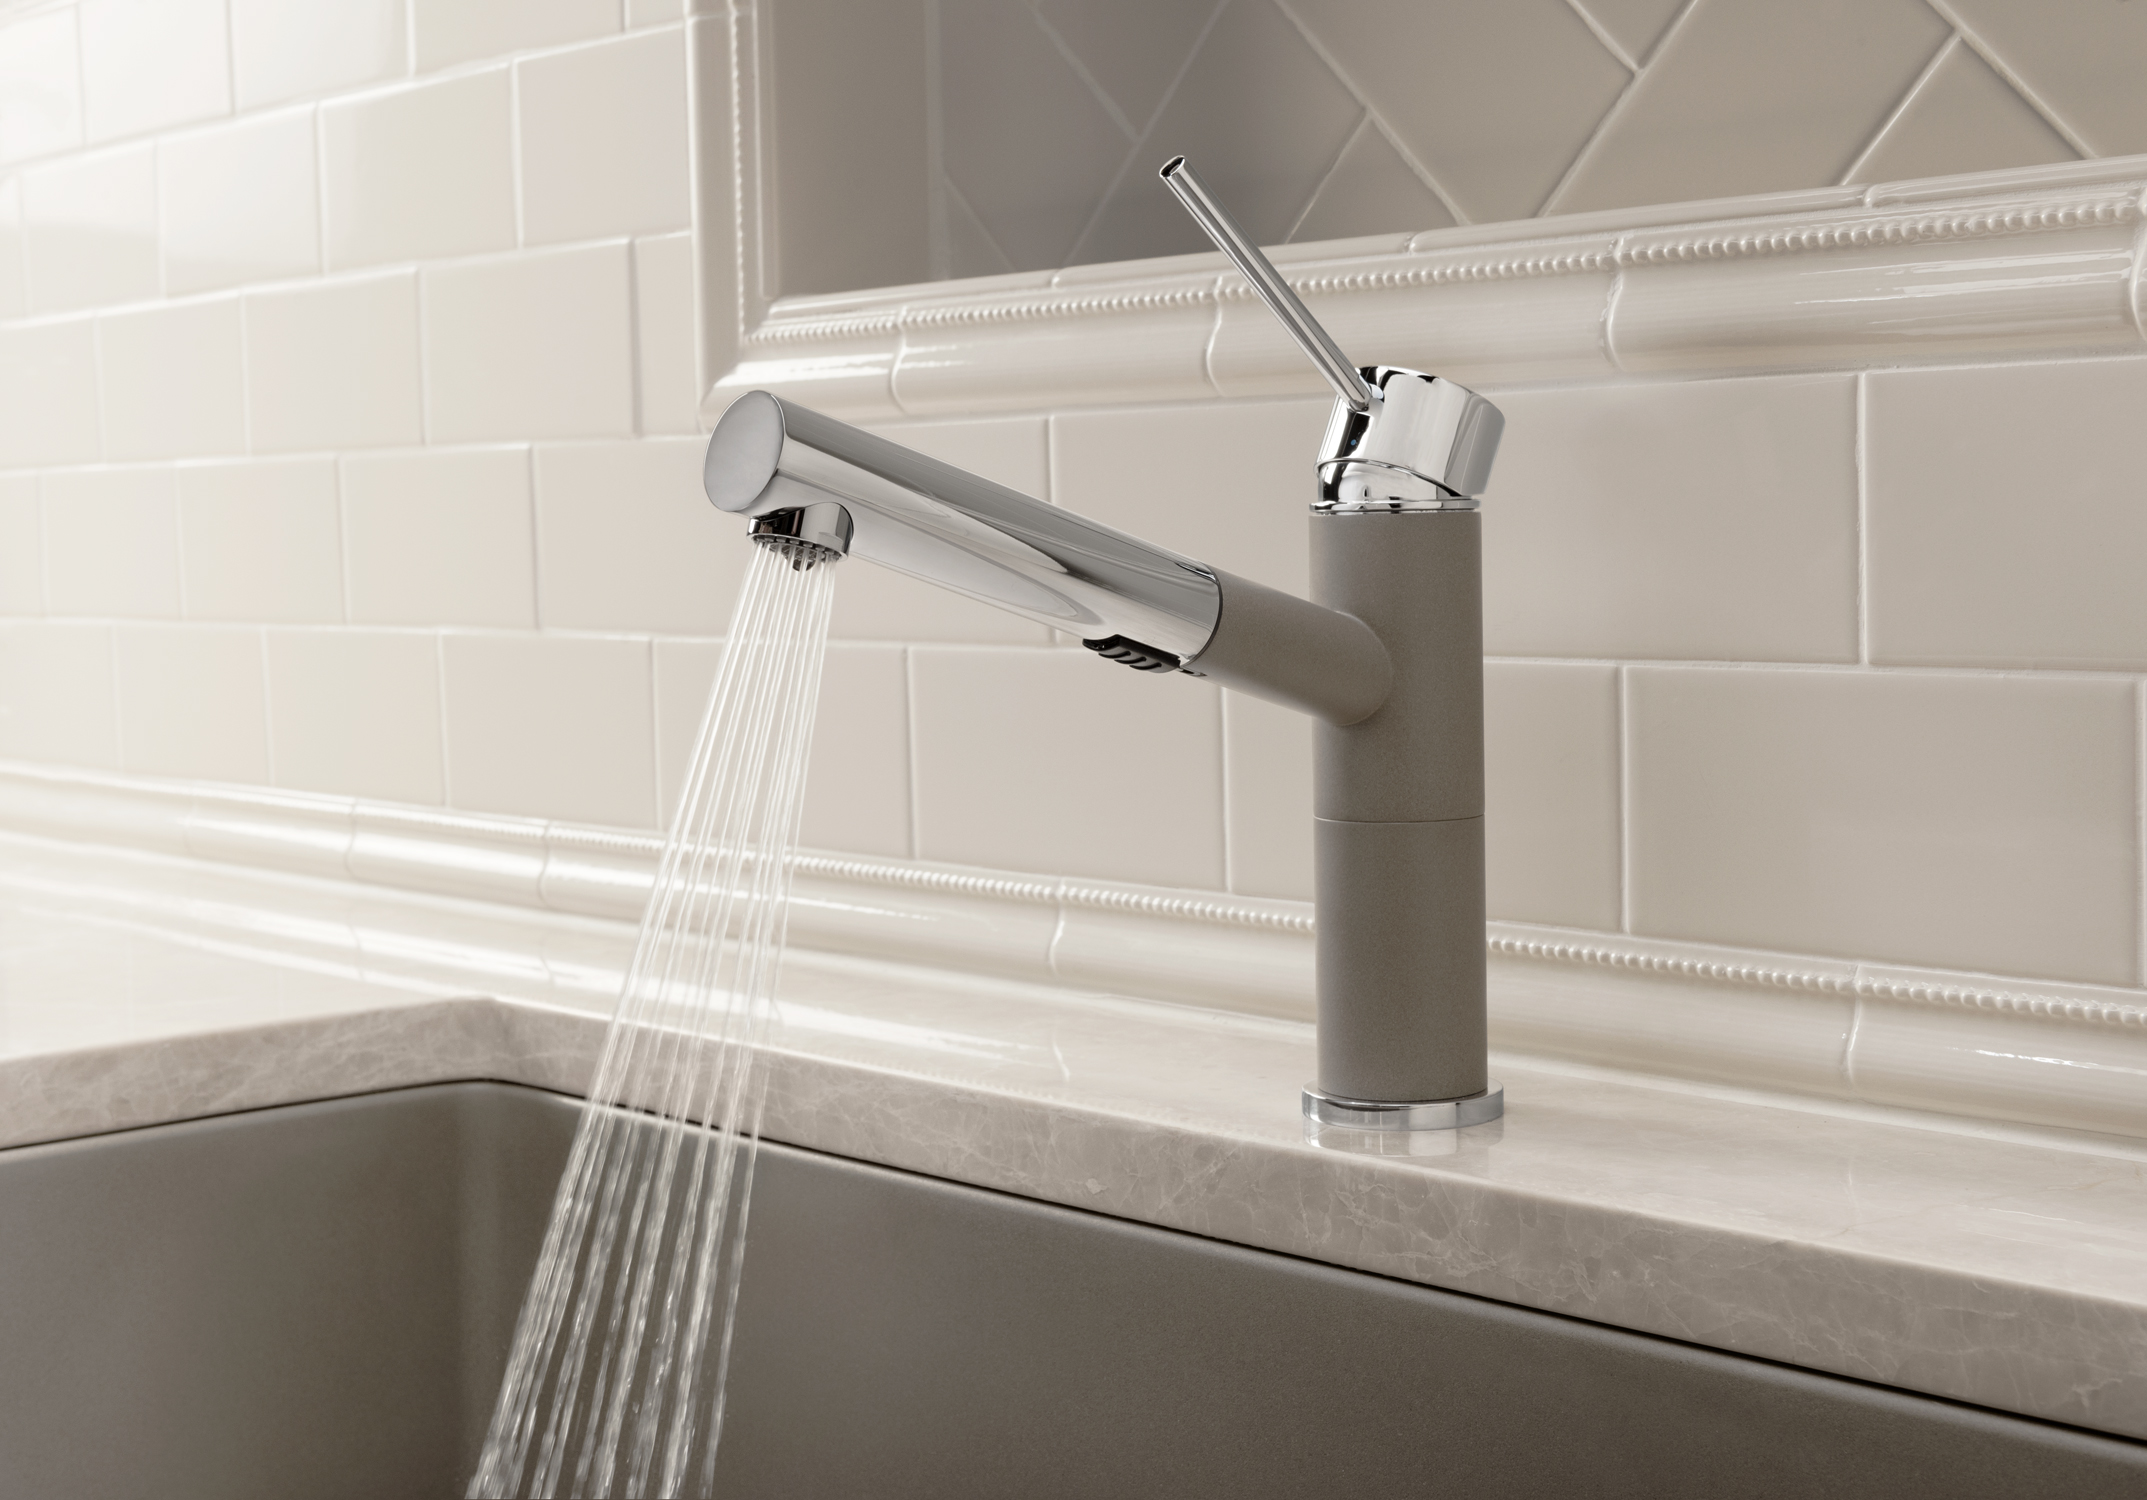 BLANCO's new kitchen faucet collection features the ALTA Compact